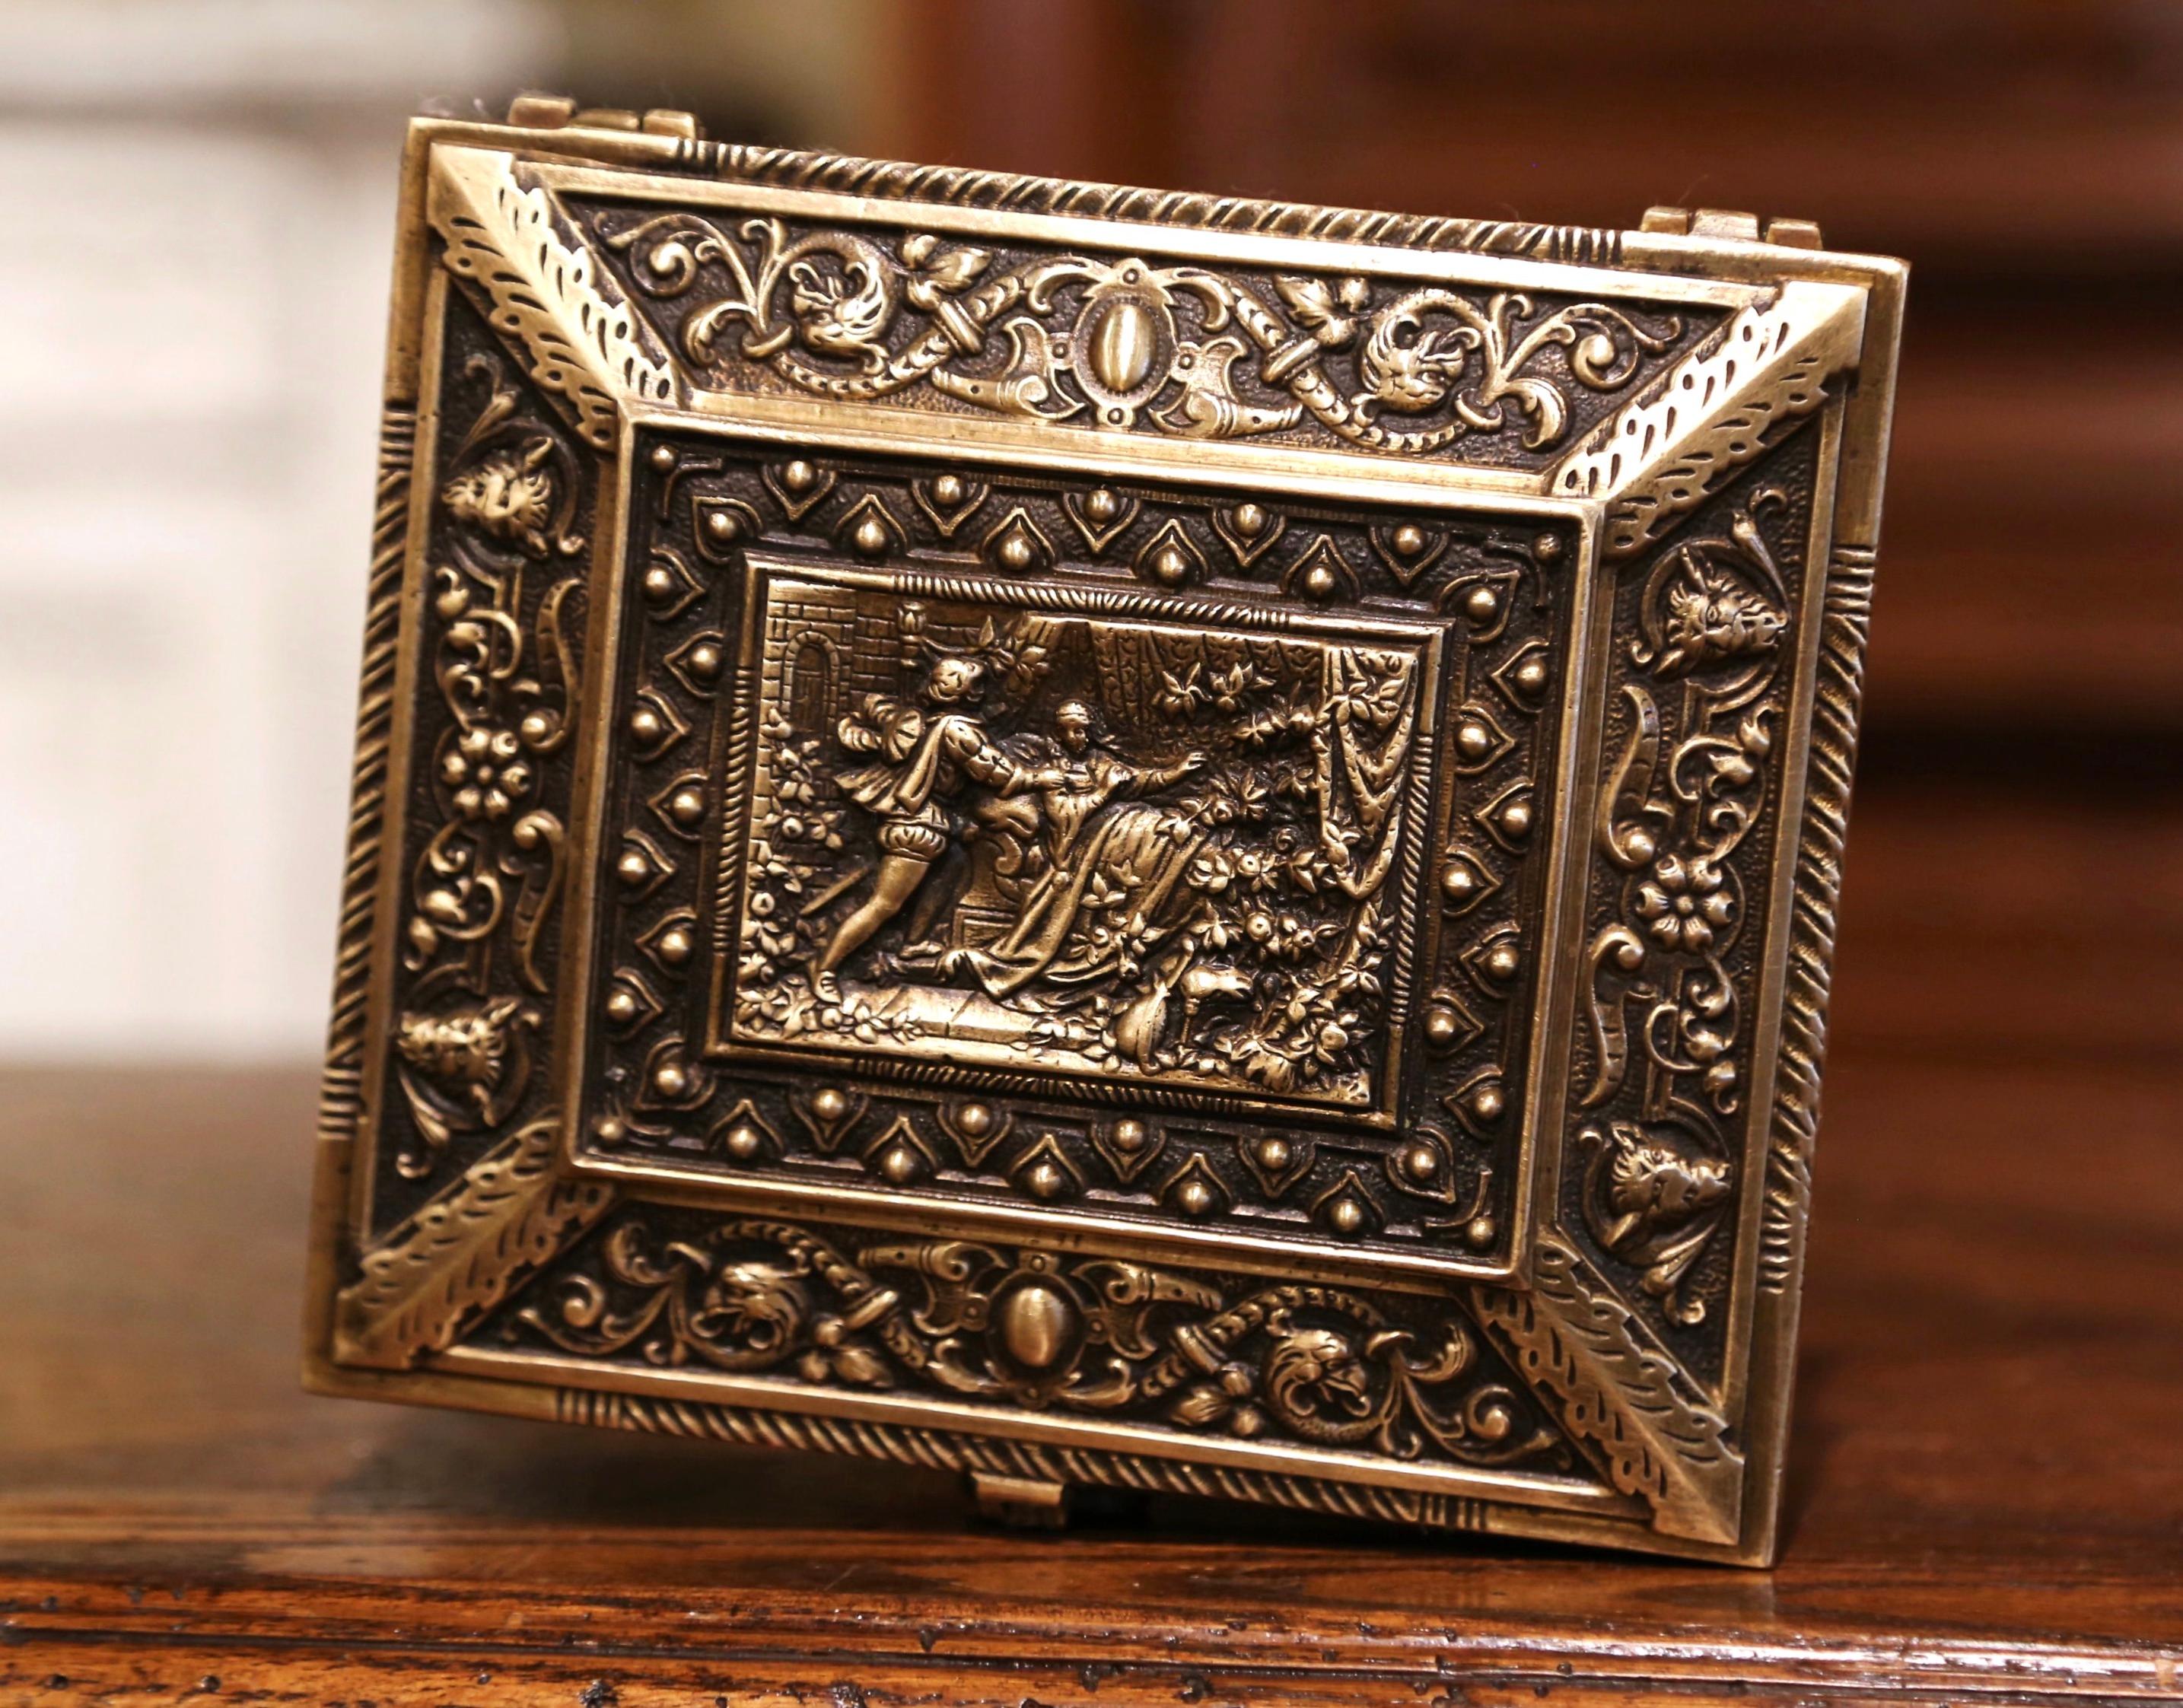 Hand-Crafted 19th Century French Patinated Bronze Jewelry Box with Mythology Decor